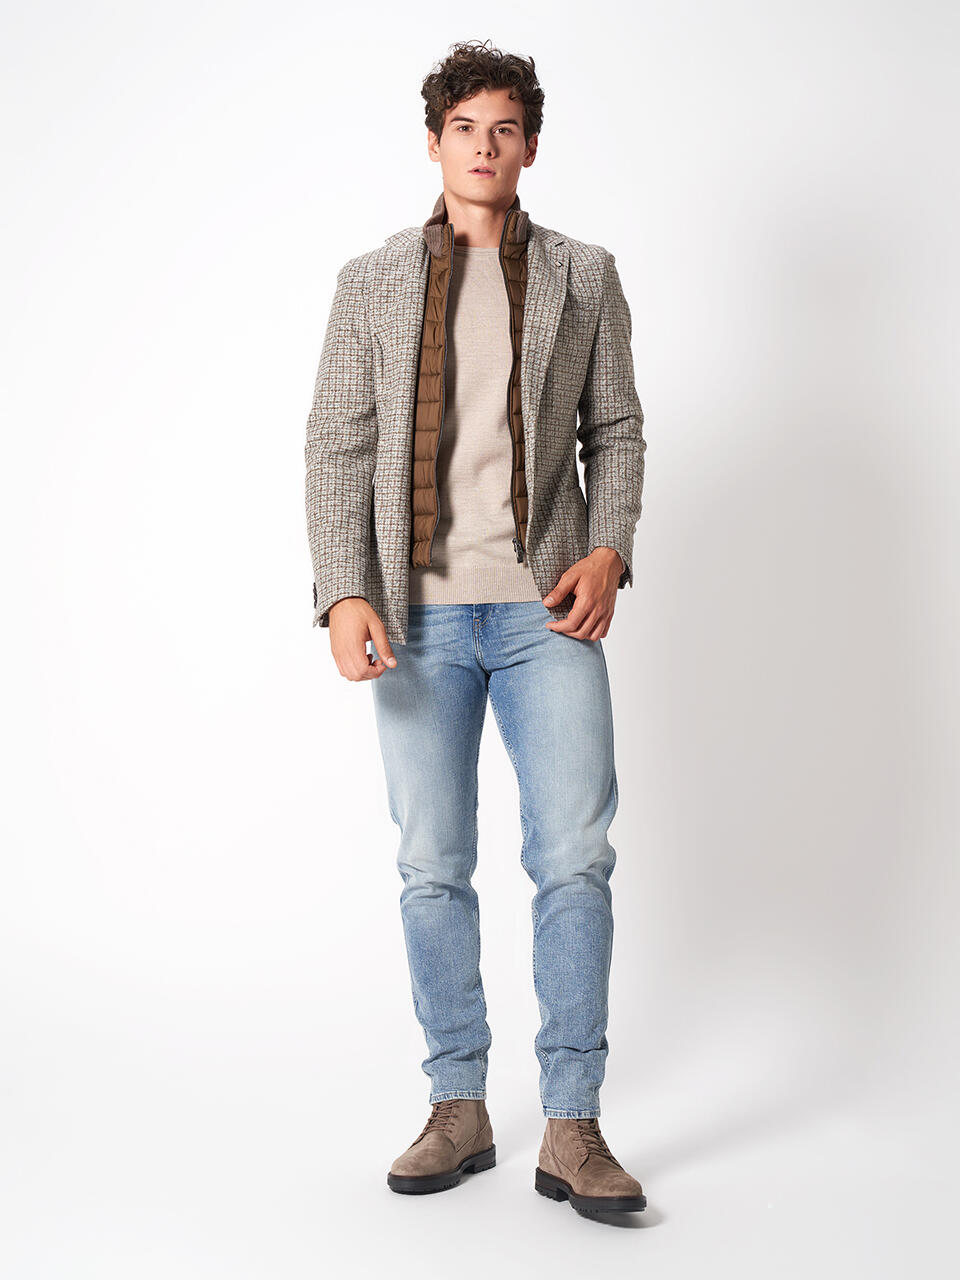 1 Jeans, 5 Looks - Tapered